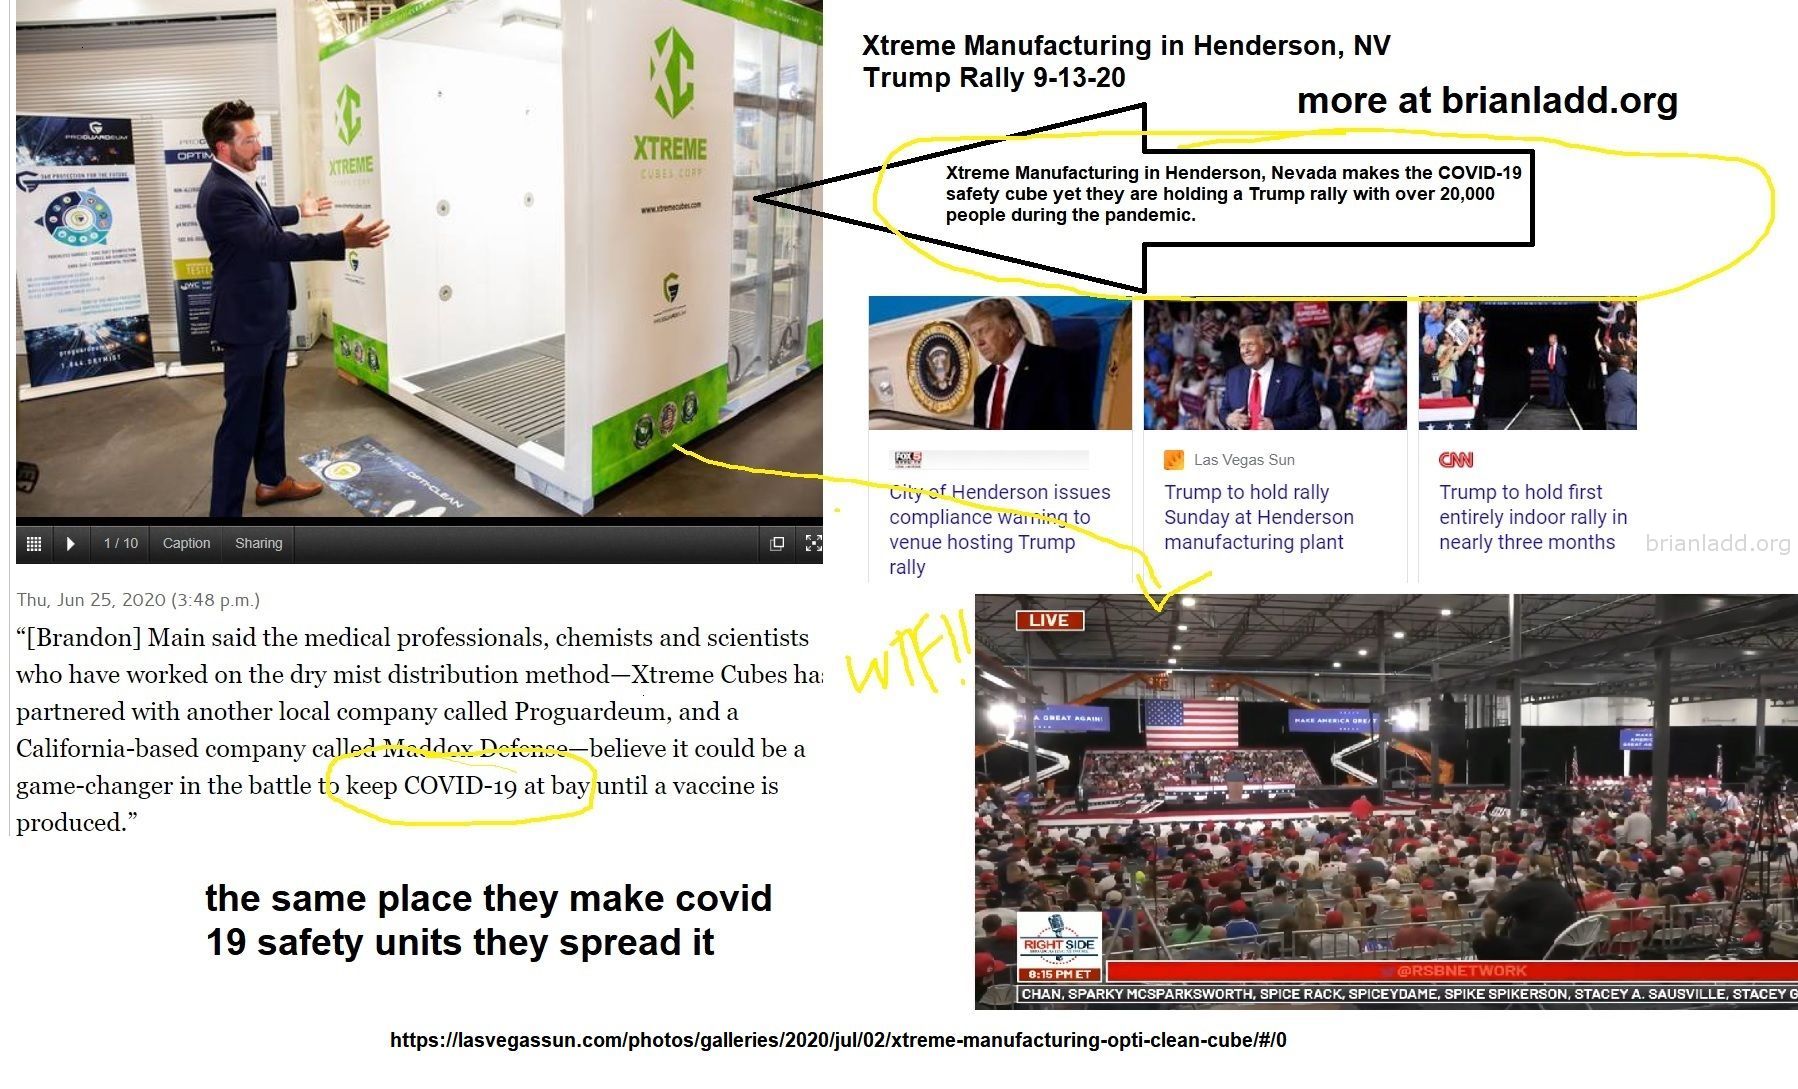 Xtreme Manufacturing In Henderson Nevada Makes The Covid 19 Safety Cube Yet They Are Holding A Trump Rally With Over 200...
Xtreme Opti-Clean Covid-19  Cube Maker Murders Over 200,000 Americans, Numbers  Xtreme Manufacturing In Henderson Nevada Makes The Covid-19 Safety Cube Yet They Are Holding A Trump Rally With Over 20 000 People During The Pandemic How Ironic And Stupid  The Same Place They Make Covid 19 Safety Units They Spread It  More At   https://briansprediction.com/Trump-Rally   https://Vegasinc.Lasvegassun.Com/Business/2020/Jul/06/Local-Company-Develops-A-Weapon-For-Businesses-Fig/
